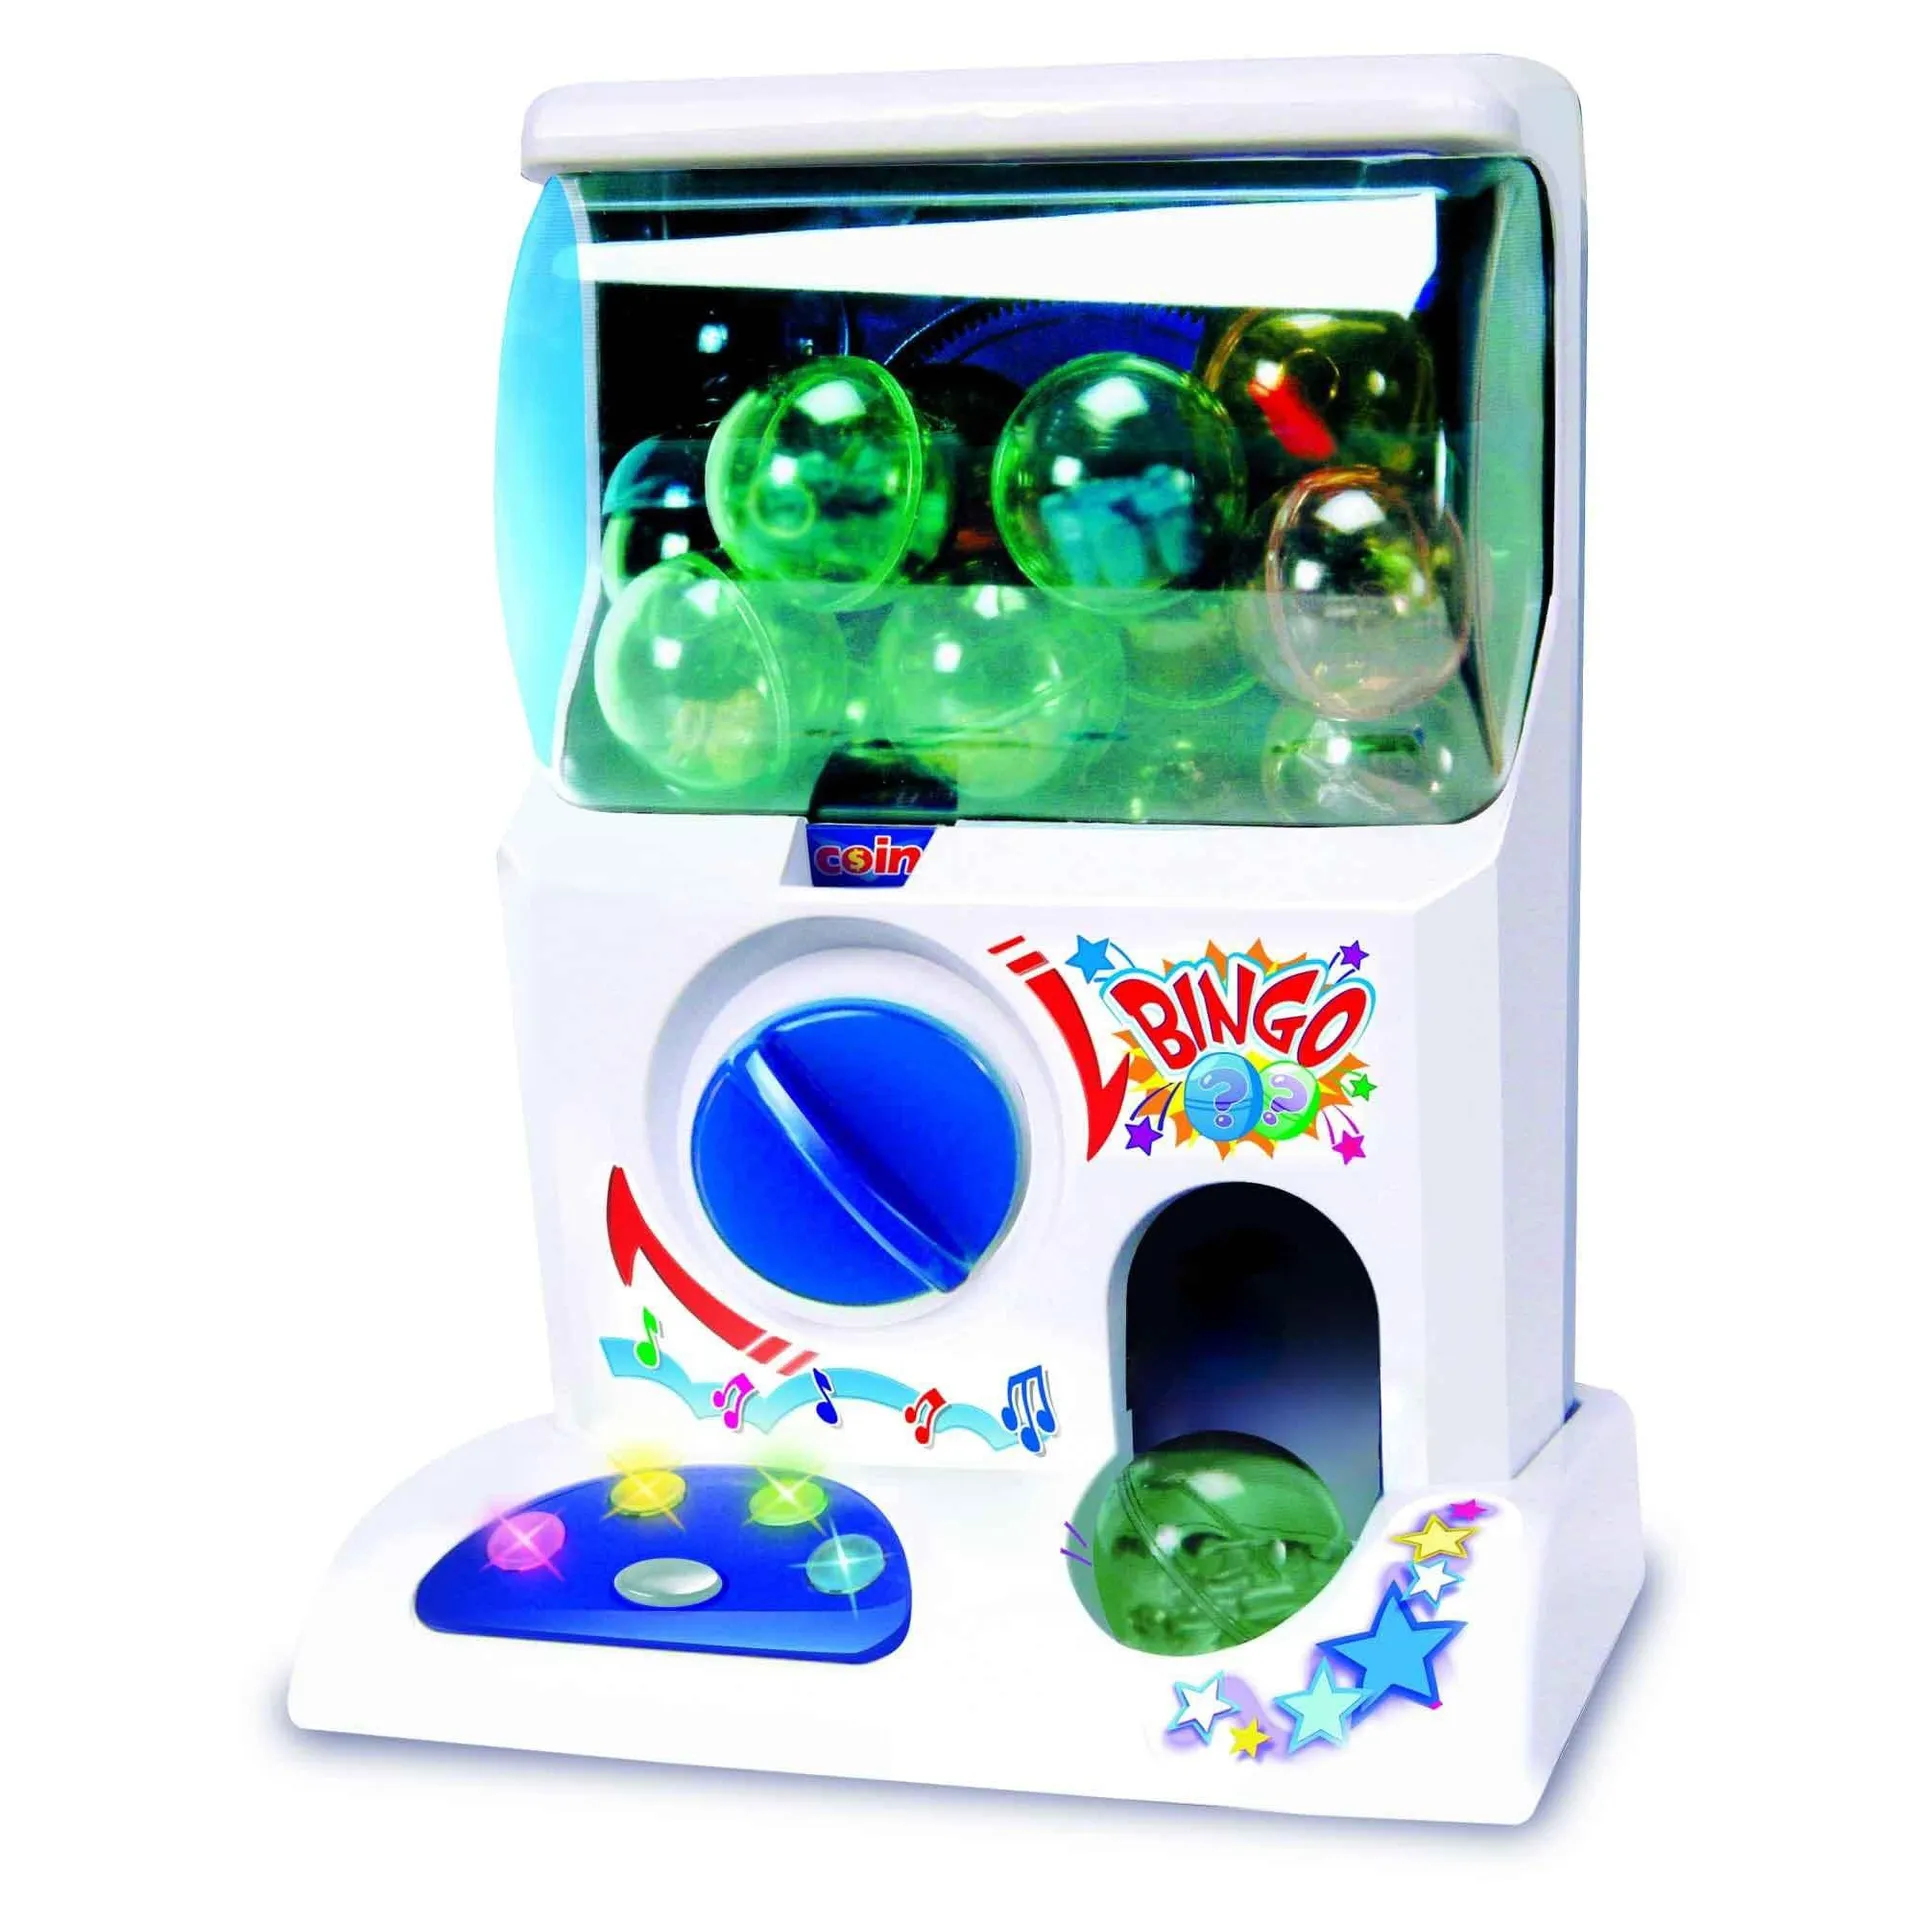 Classic Arcade Style Capsule Toy Machine Childrens Kids Toy Sweets Play Playset